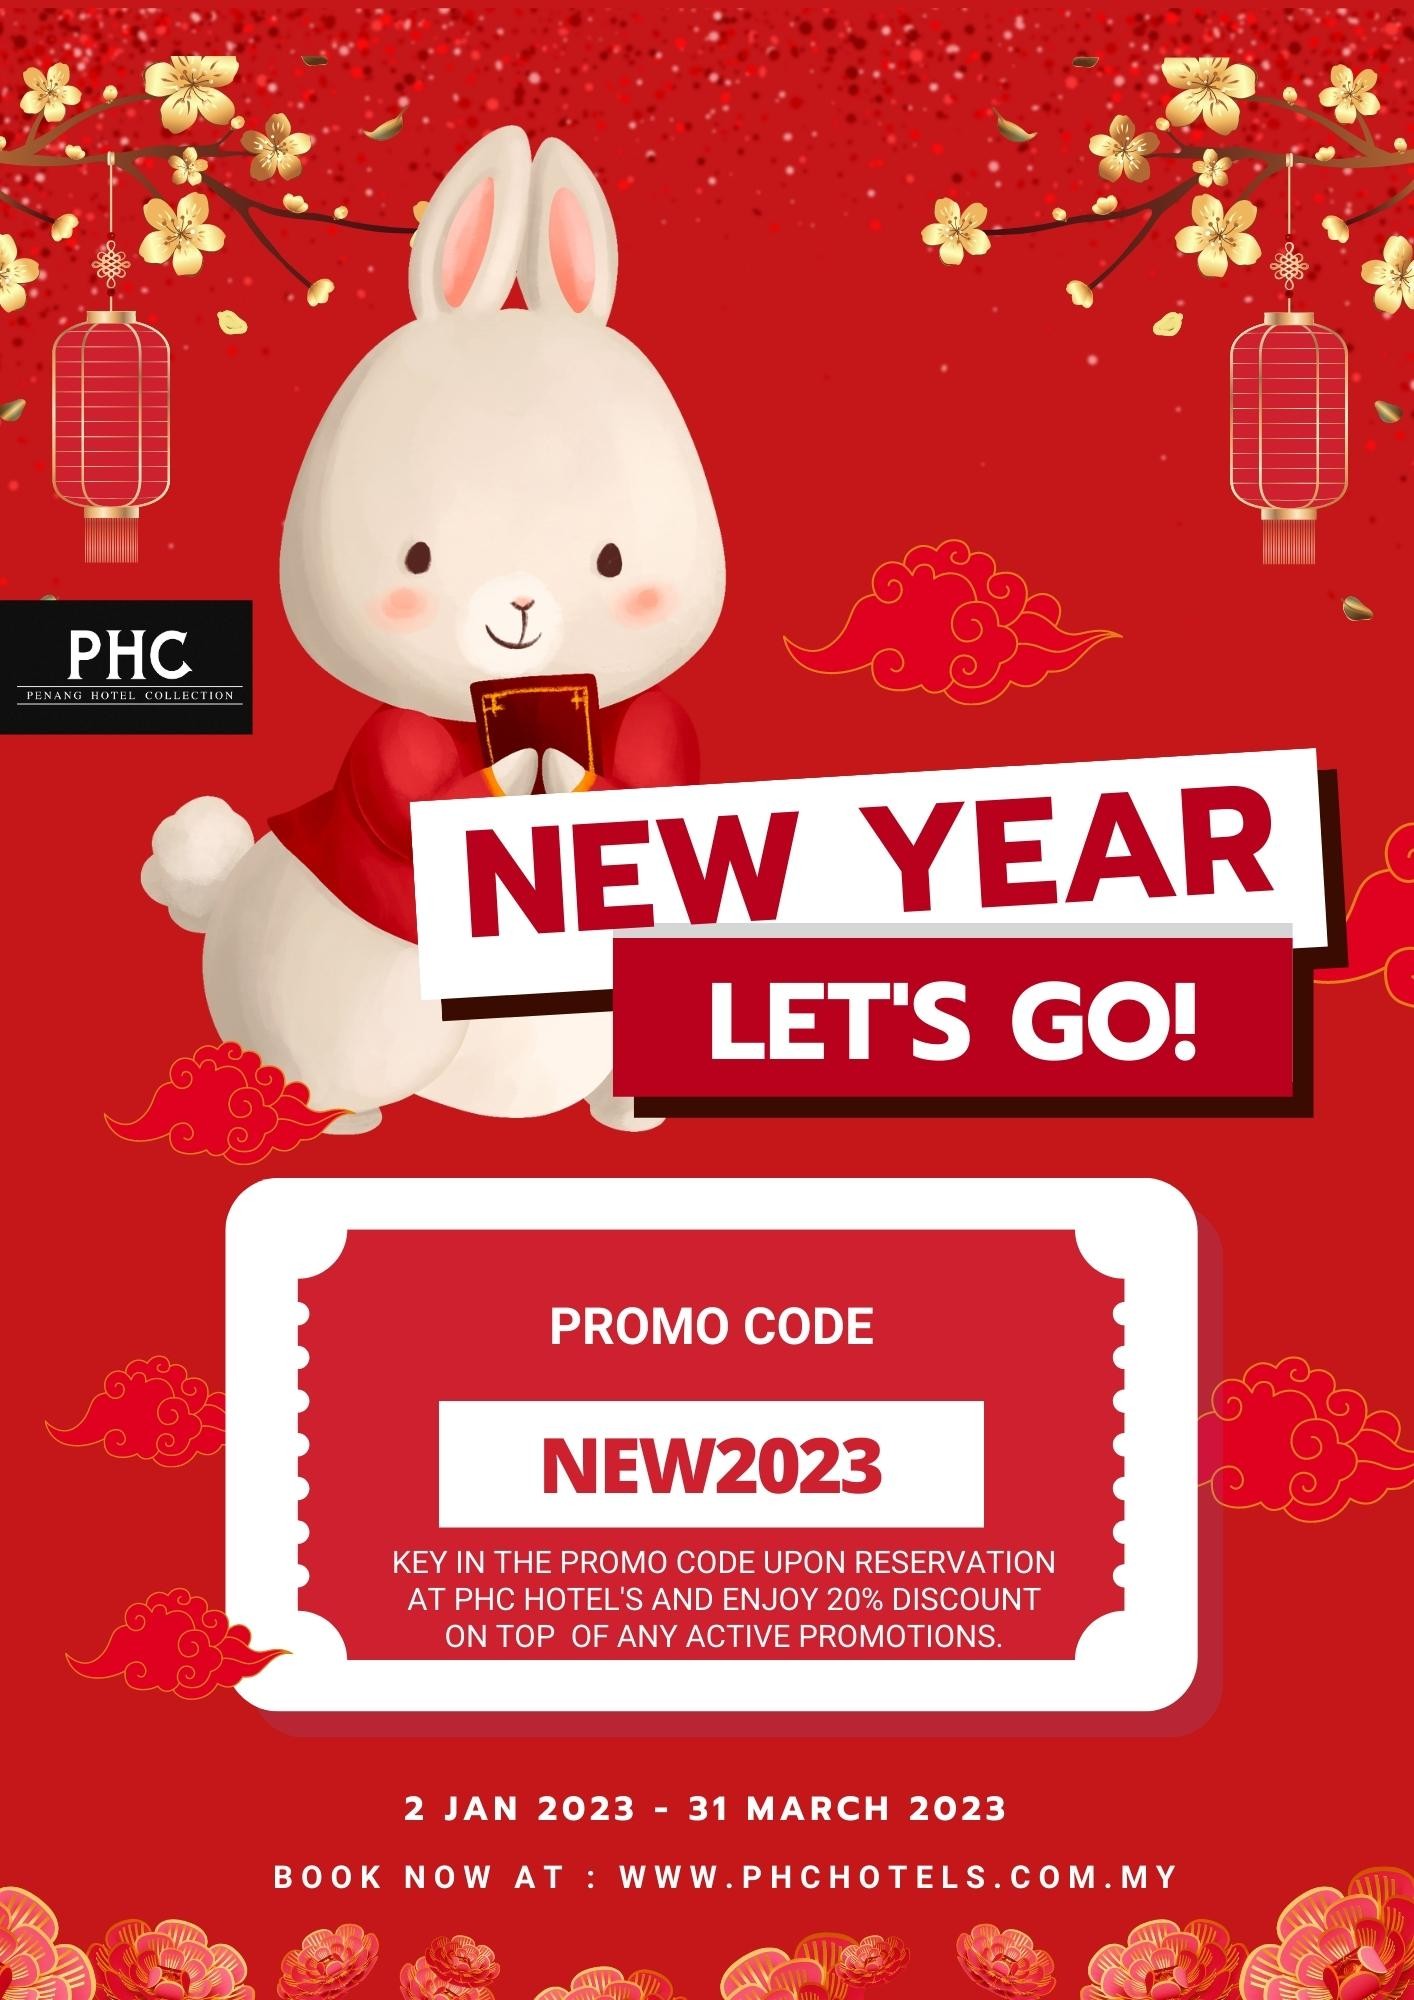 Chinese New Year let's go by PHC Hotels